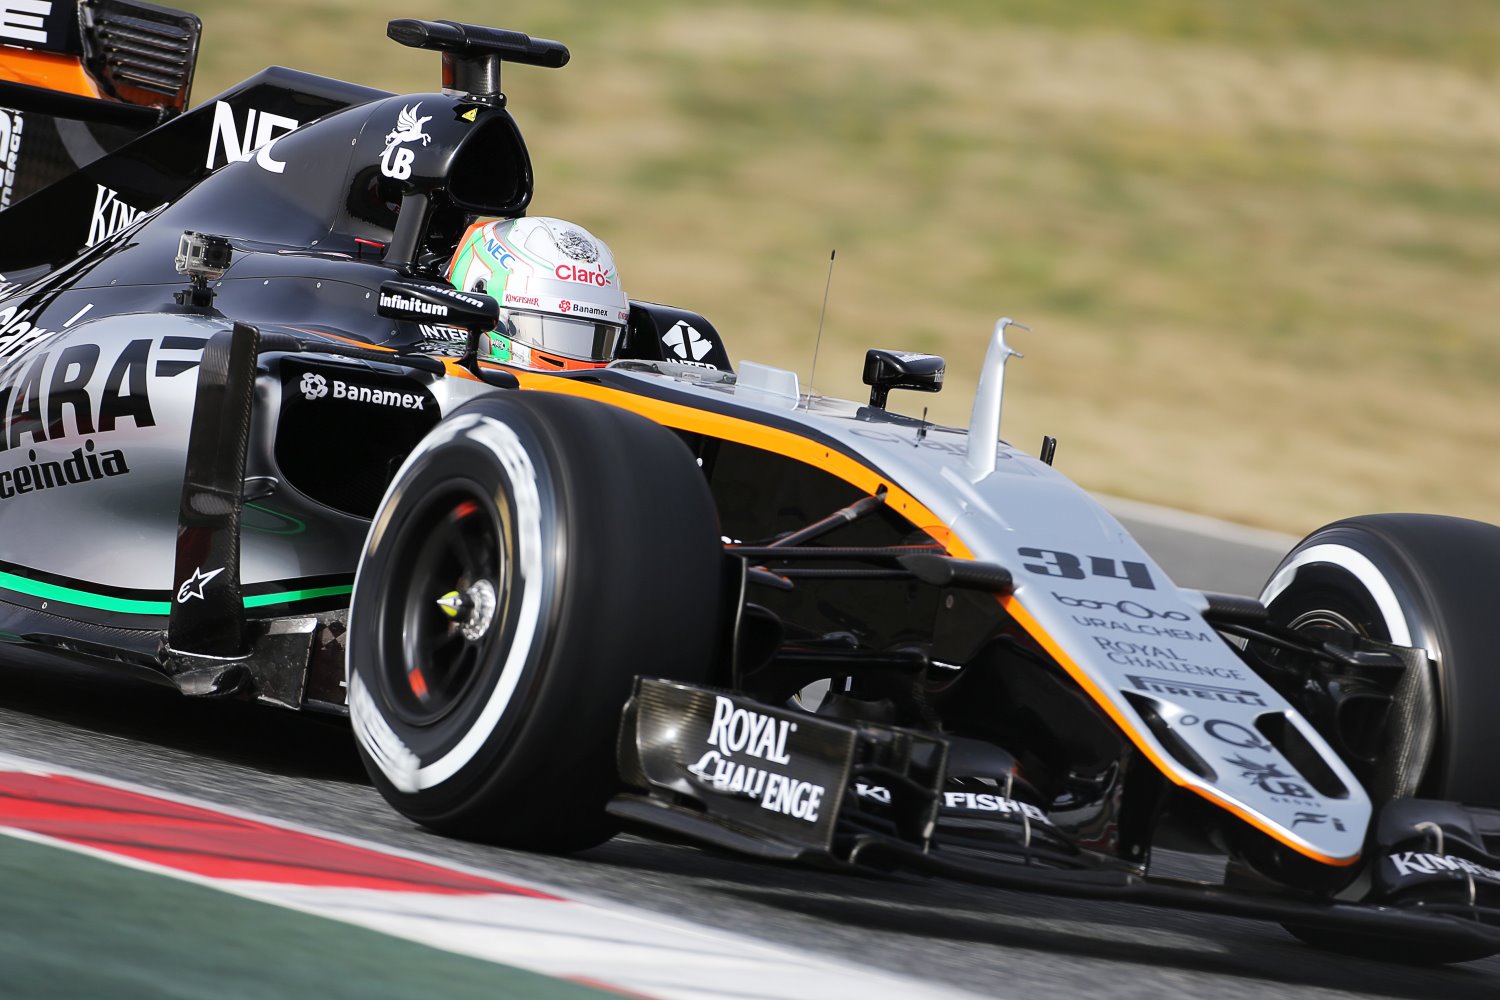 So far so good for Force India